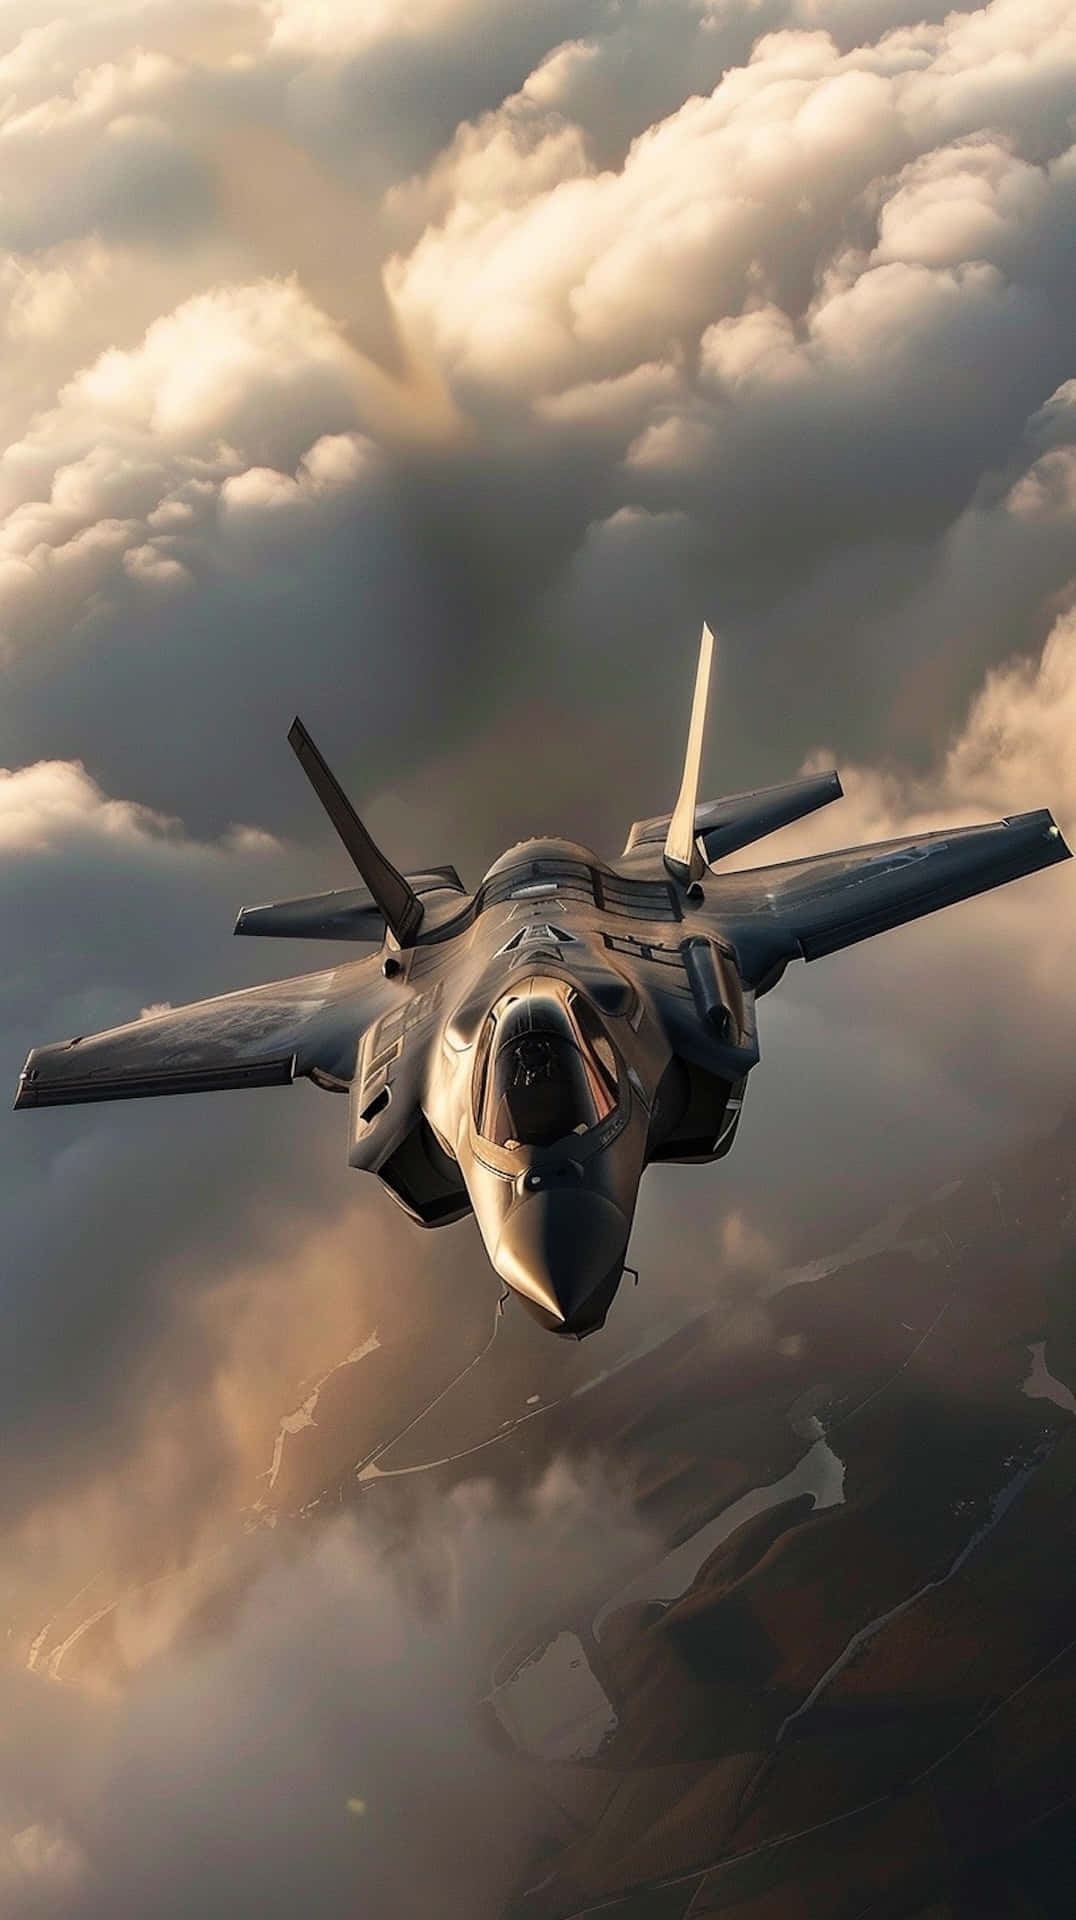 F35 Jet Flying Among Clouds Wallpaper